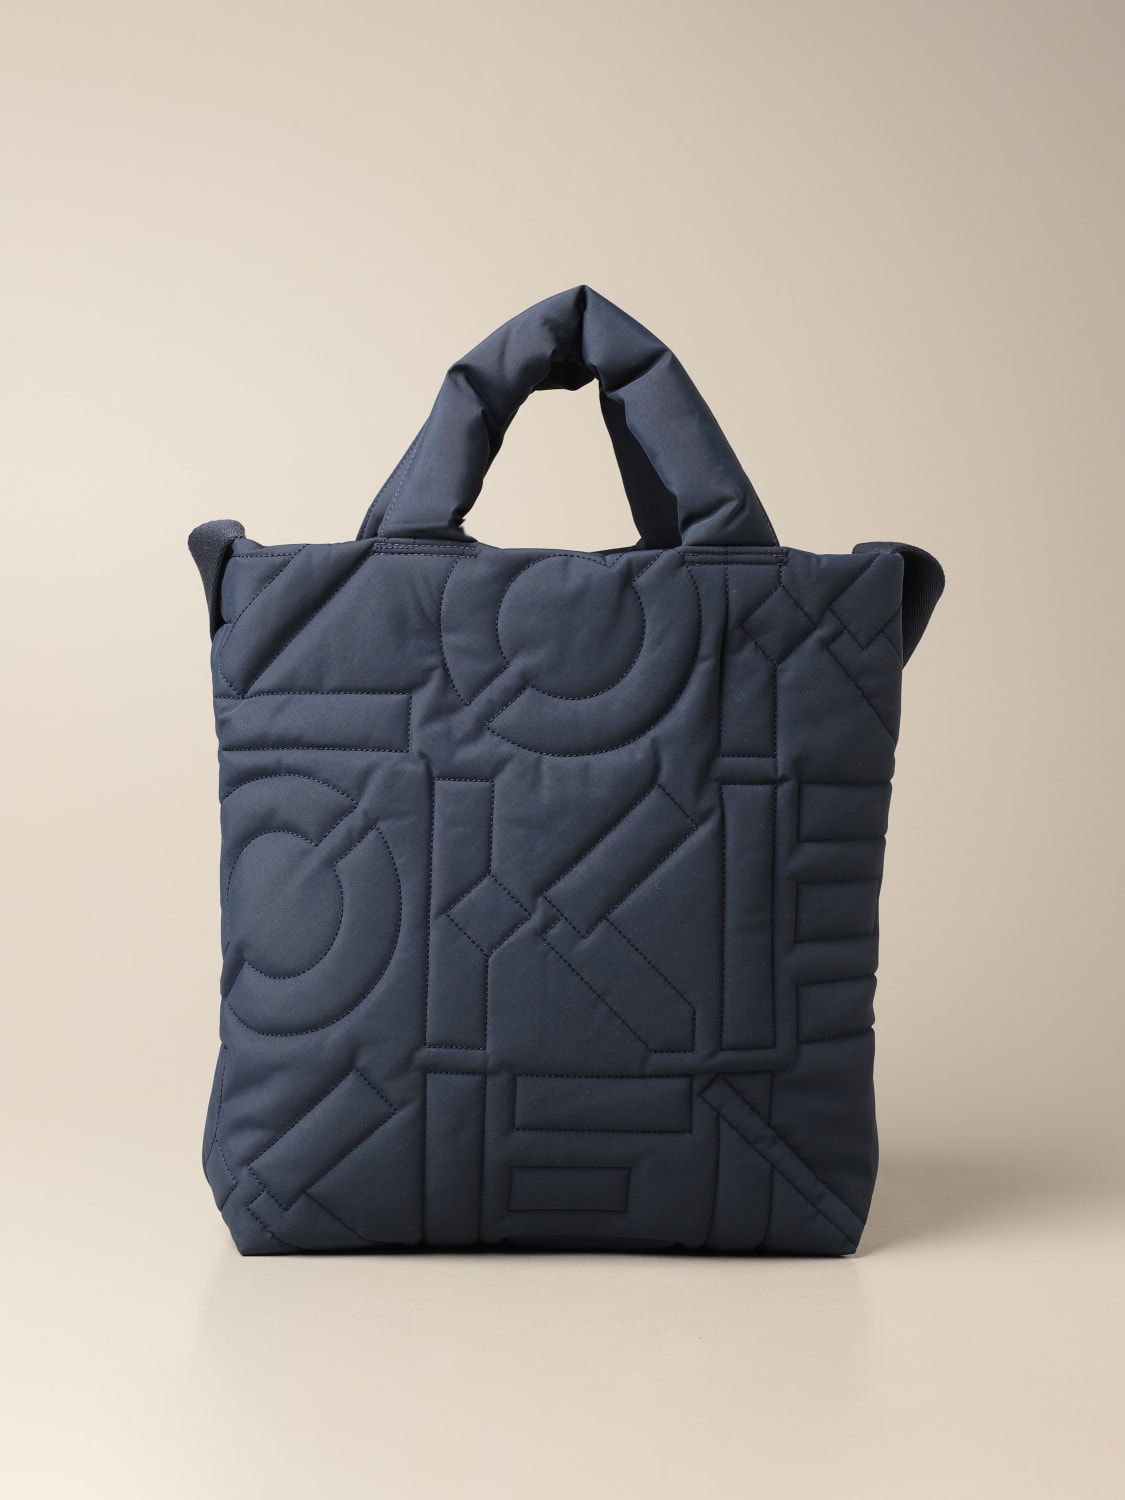 KENZO: Arctic bag in quilted recycled nylon - Blue | Kenzo tote bags  FB52SA001F08 online at GIGLIO.COM